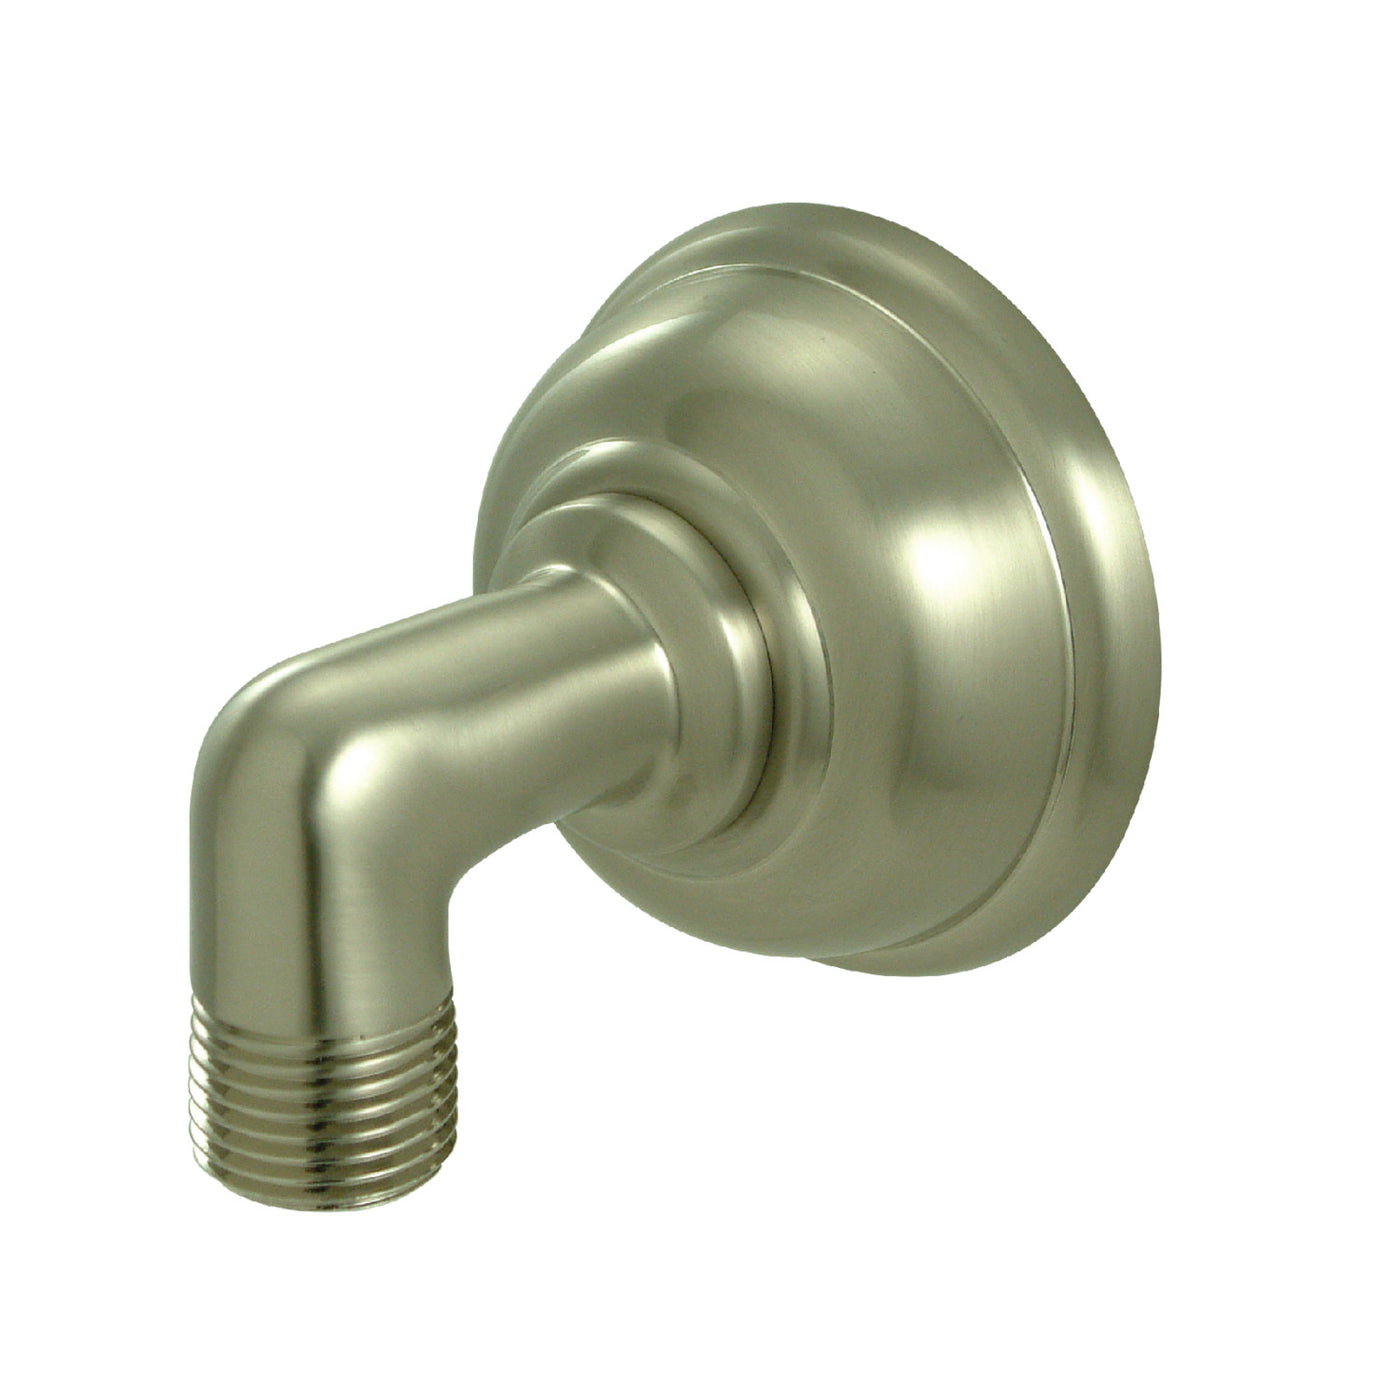 Elements of Design DK173C8 Wall Mount Supply Elbow, Brushed Nickel